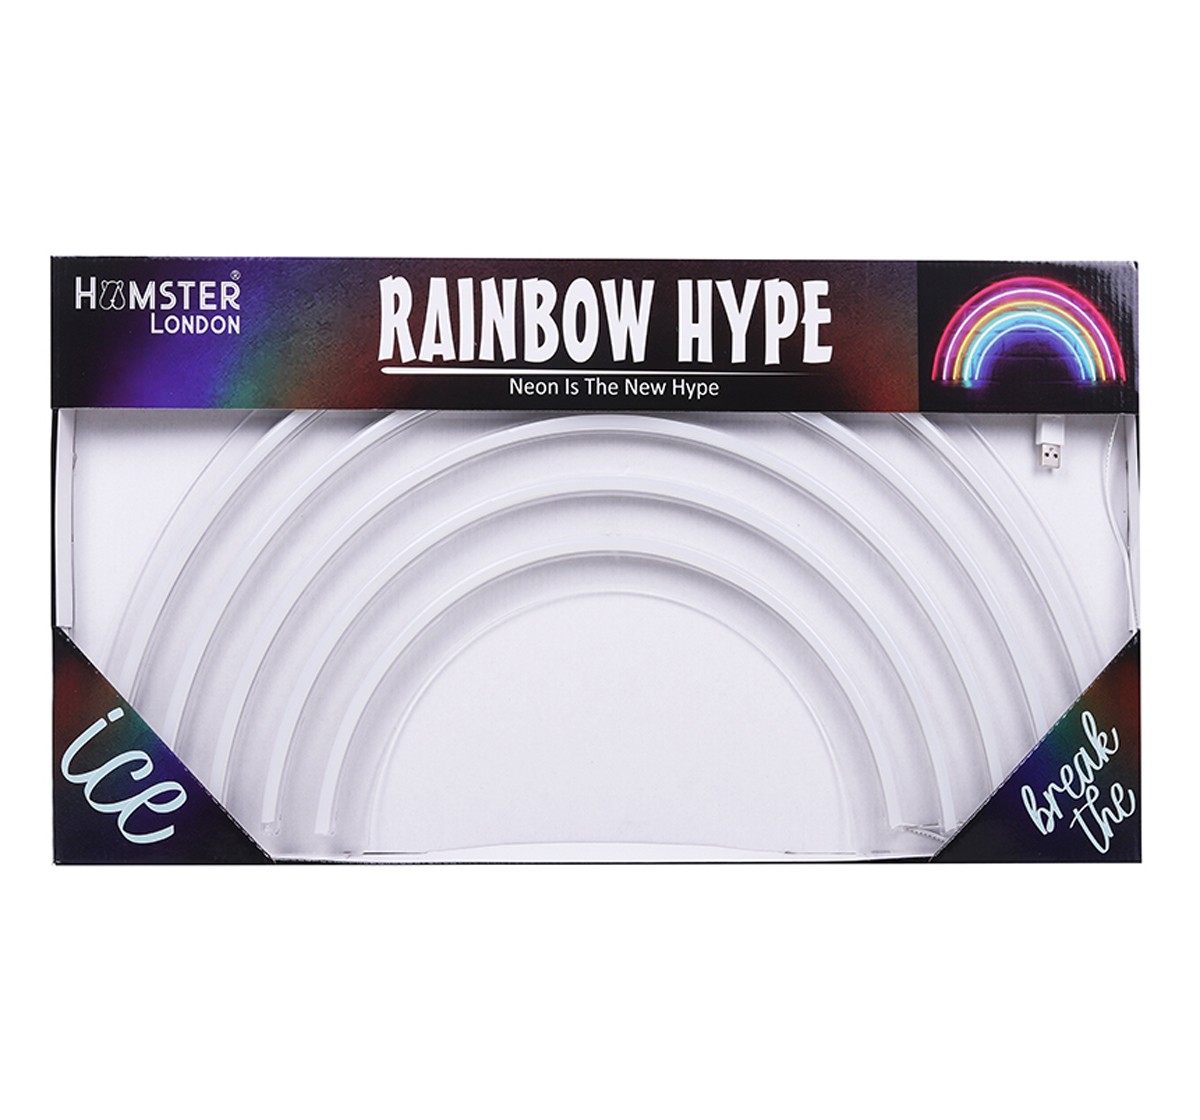 Hype Rainbow Shaped Neon LED Light by Hamster London, Pink, 10Y+